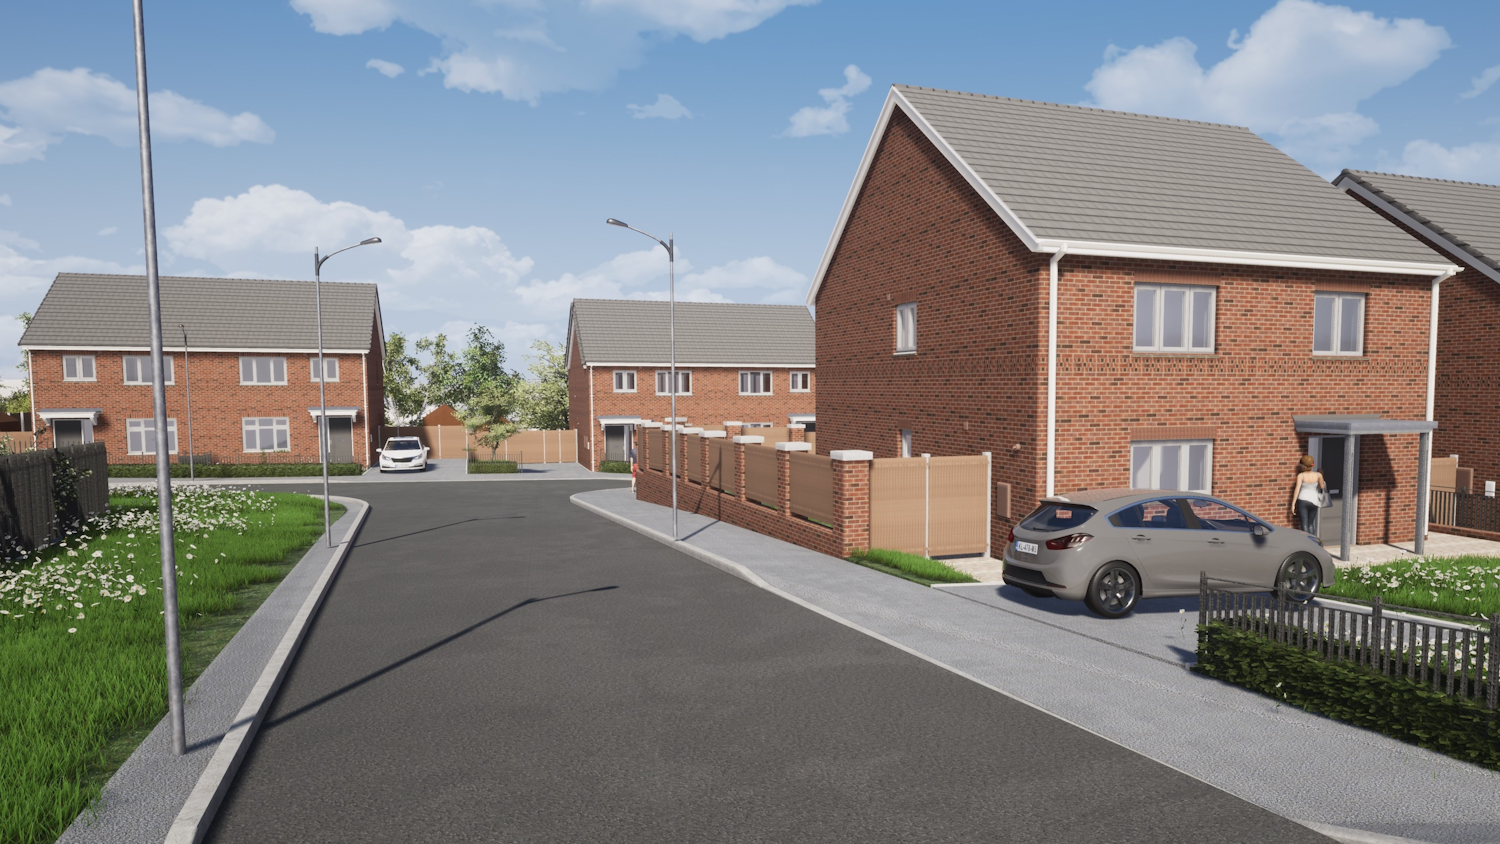 Ramshead Approach, LS14 - Proposed New Council Homes